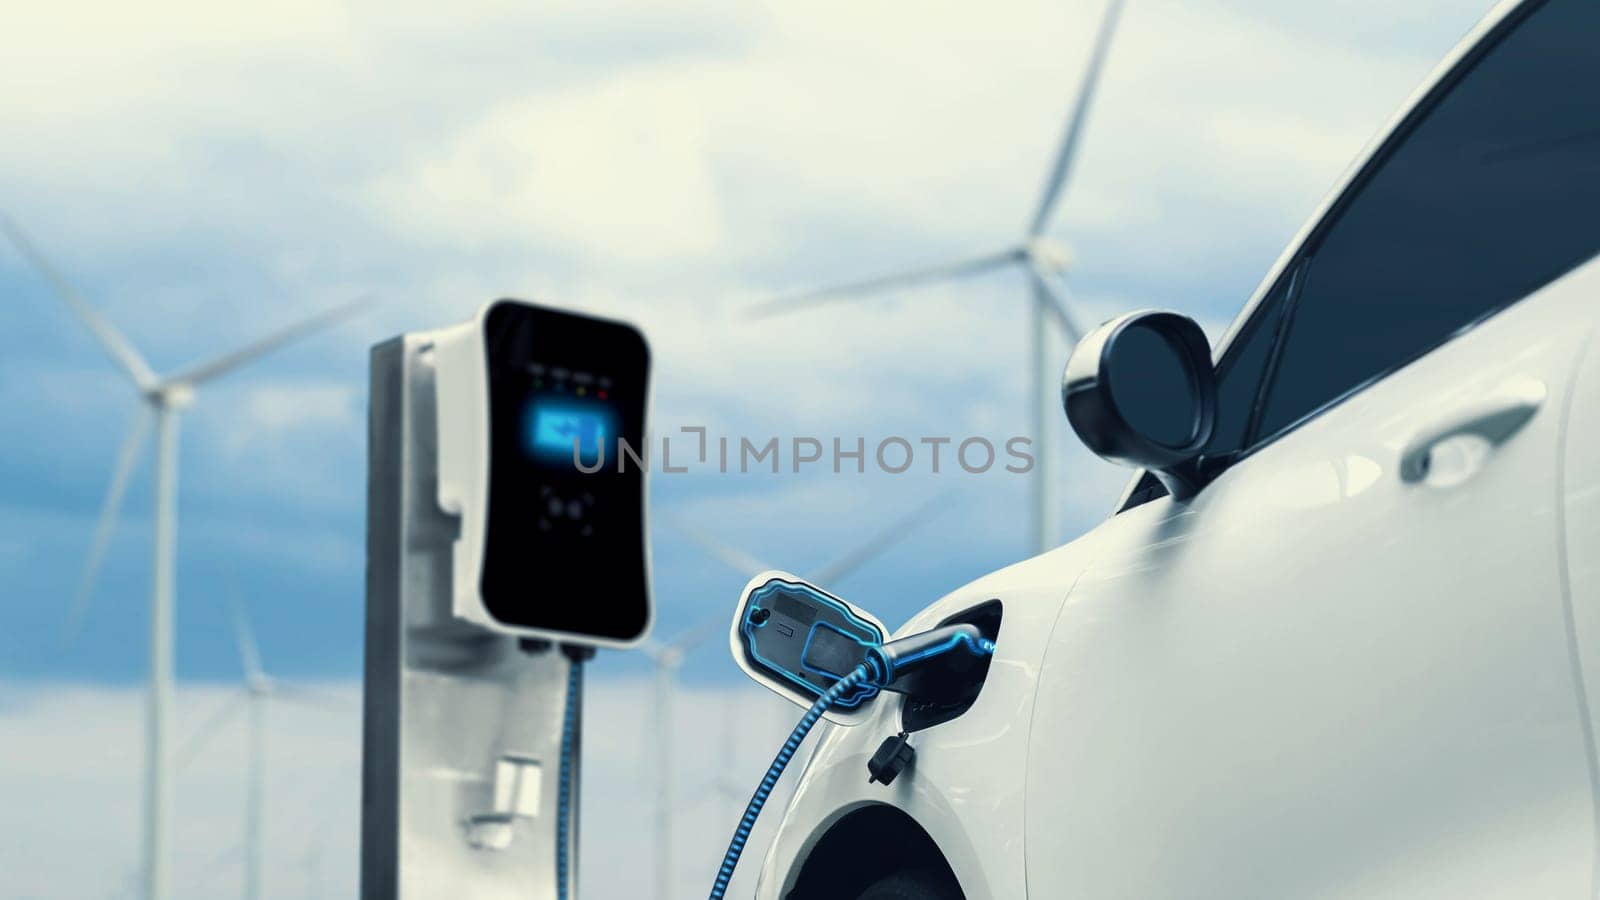 Electric car recharging energy from charging station by smart EV charger in wind turbine farm with nature outdoor background. Technological advance of alternative clean sustainable energy. Peruse